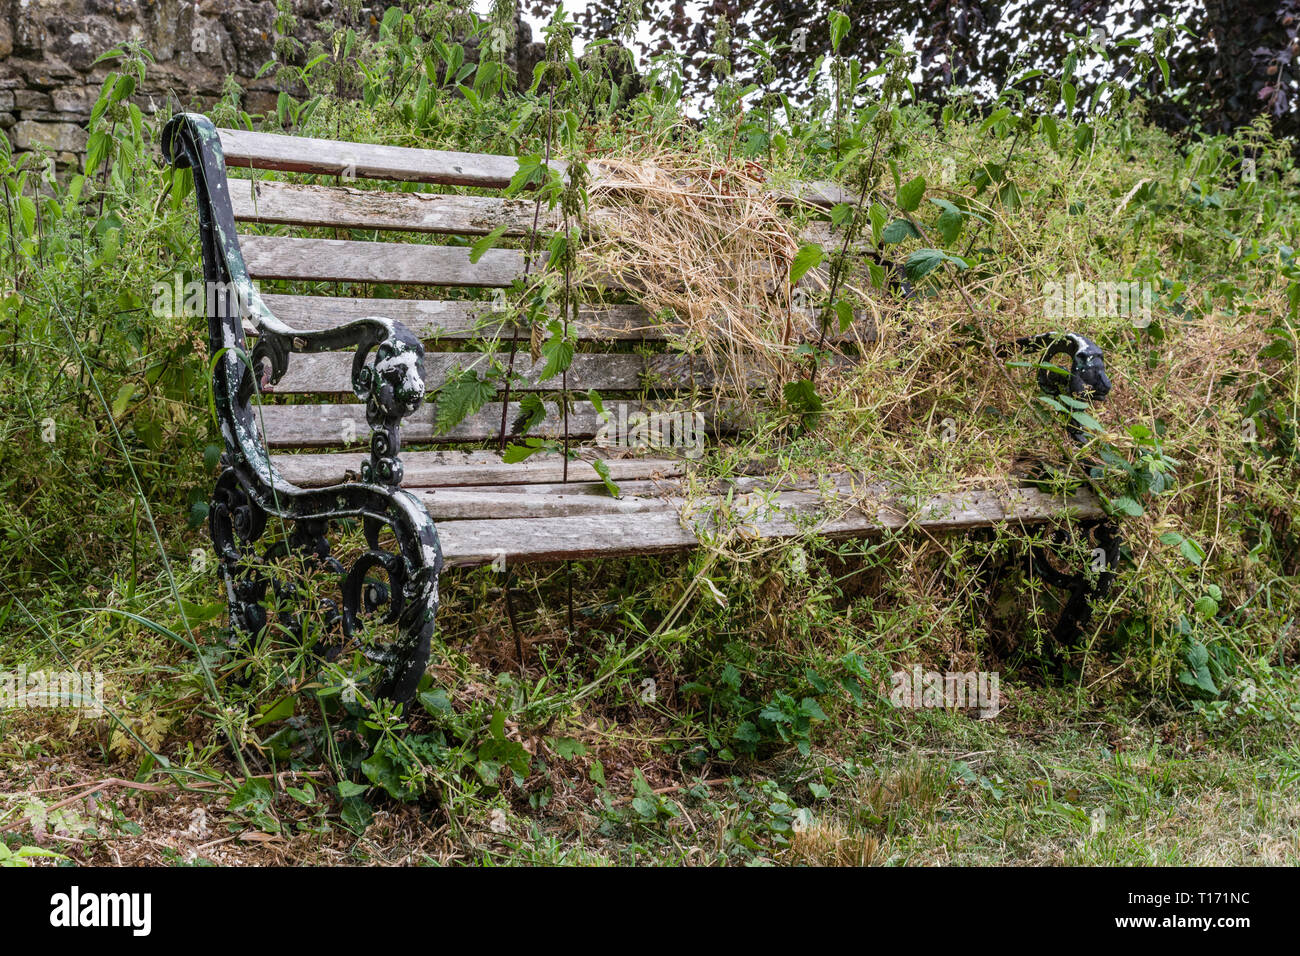 Old wooden bench overgrown with weeds and grasses in a country churchyard, UK Stock Photo